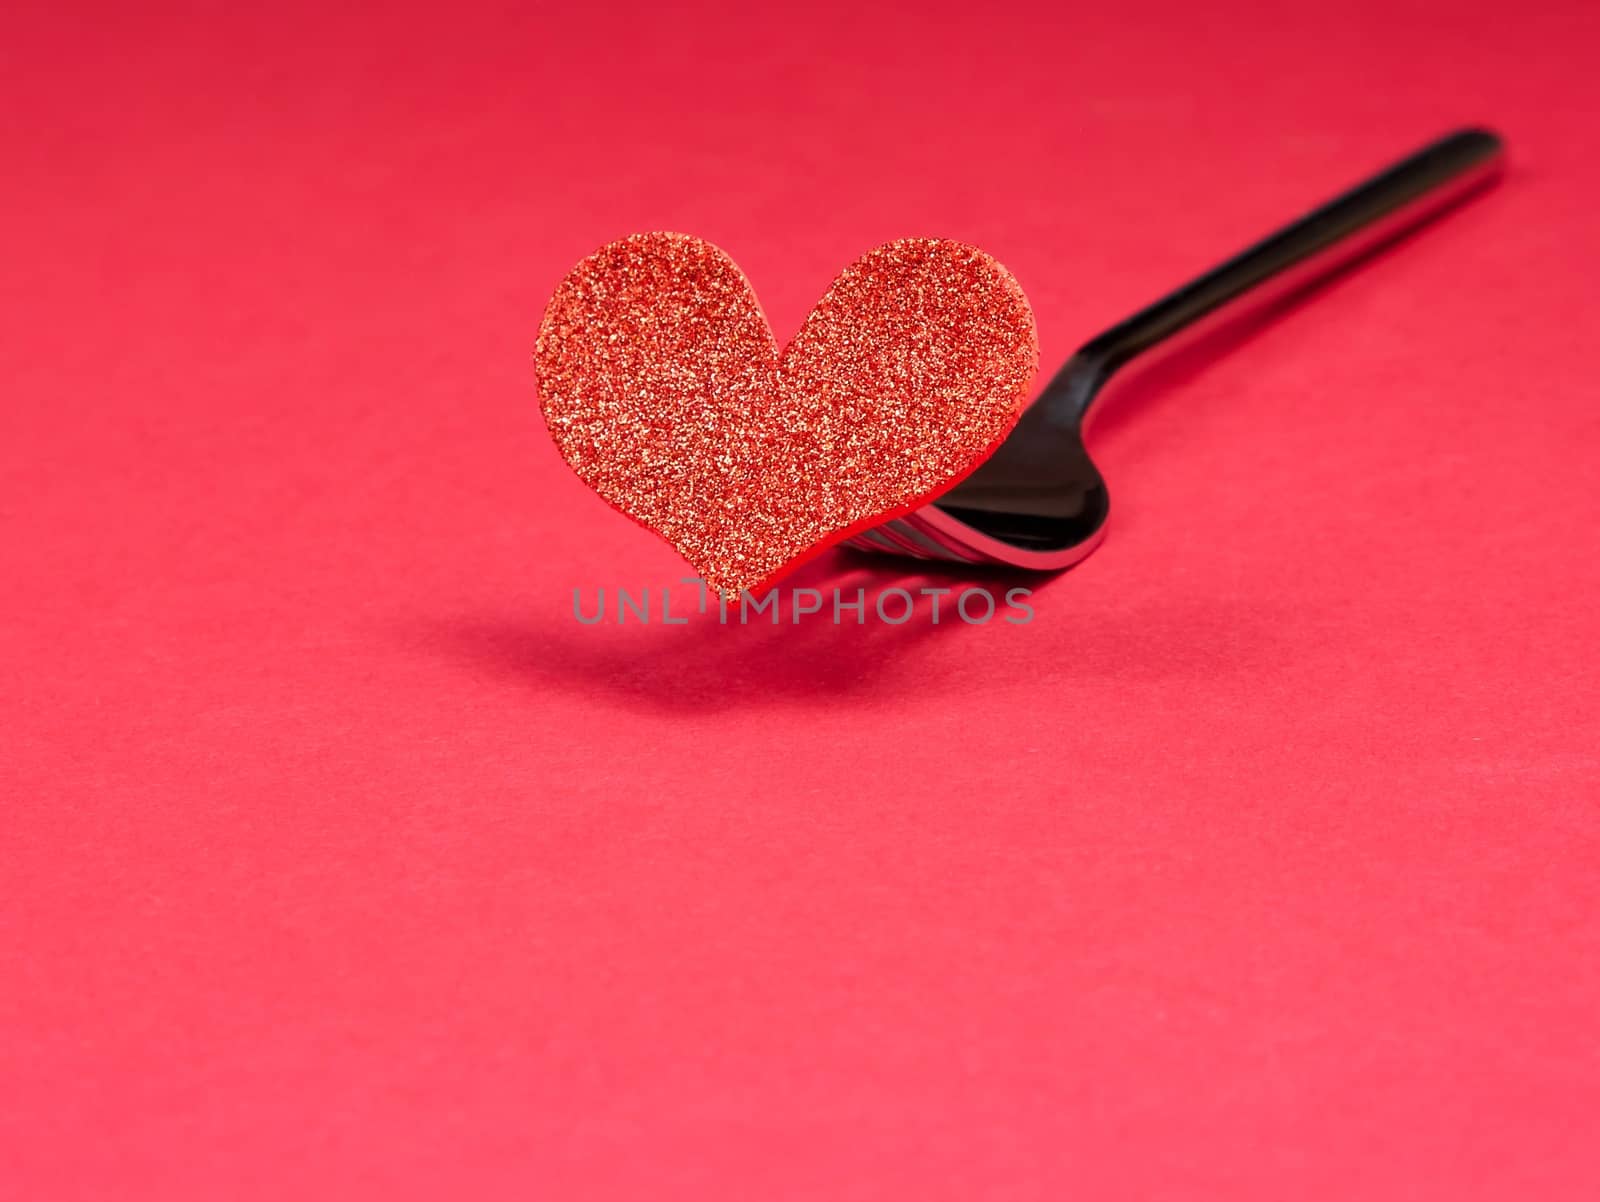 decorative red heart near a fork on red background with space for text, concept valentine day dinner 